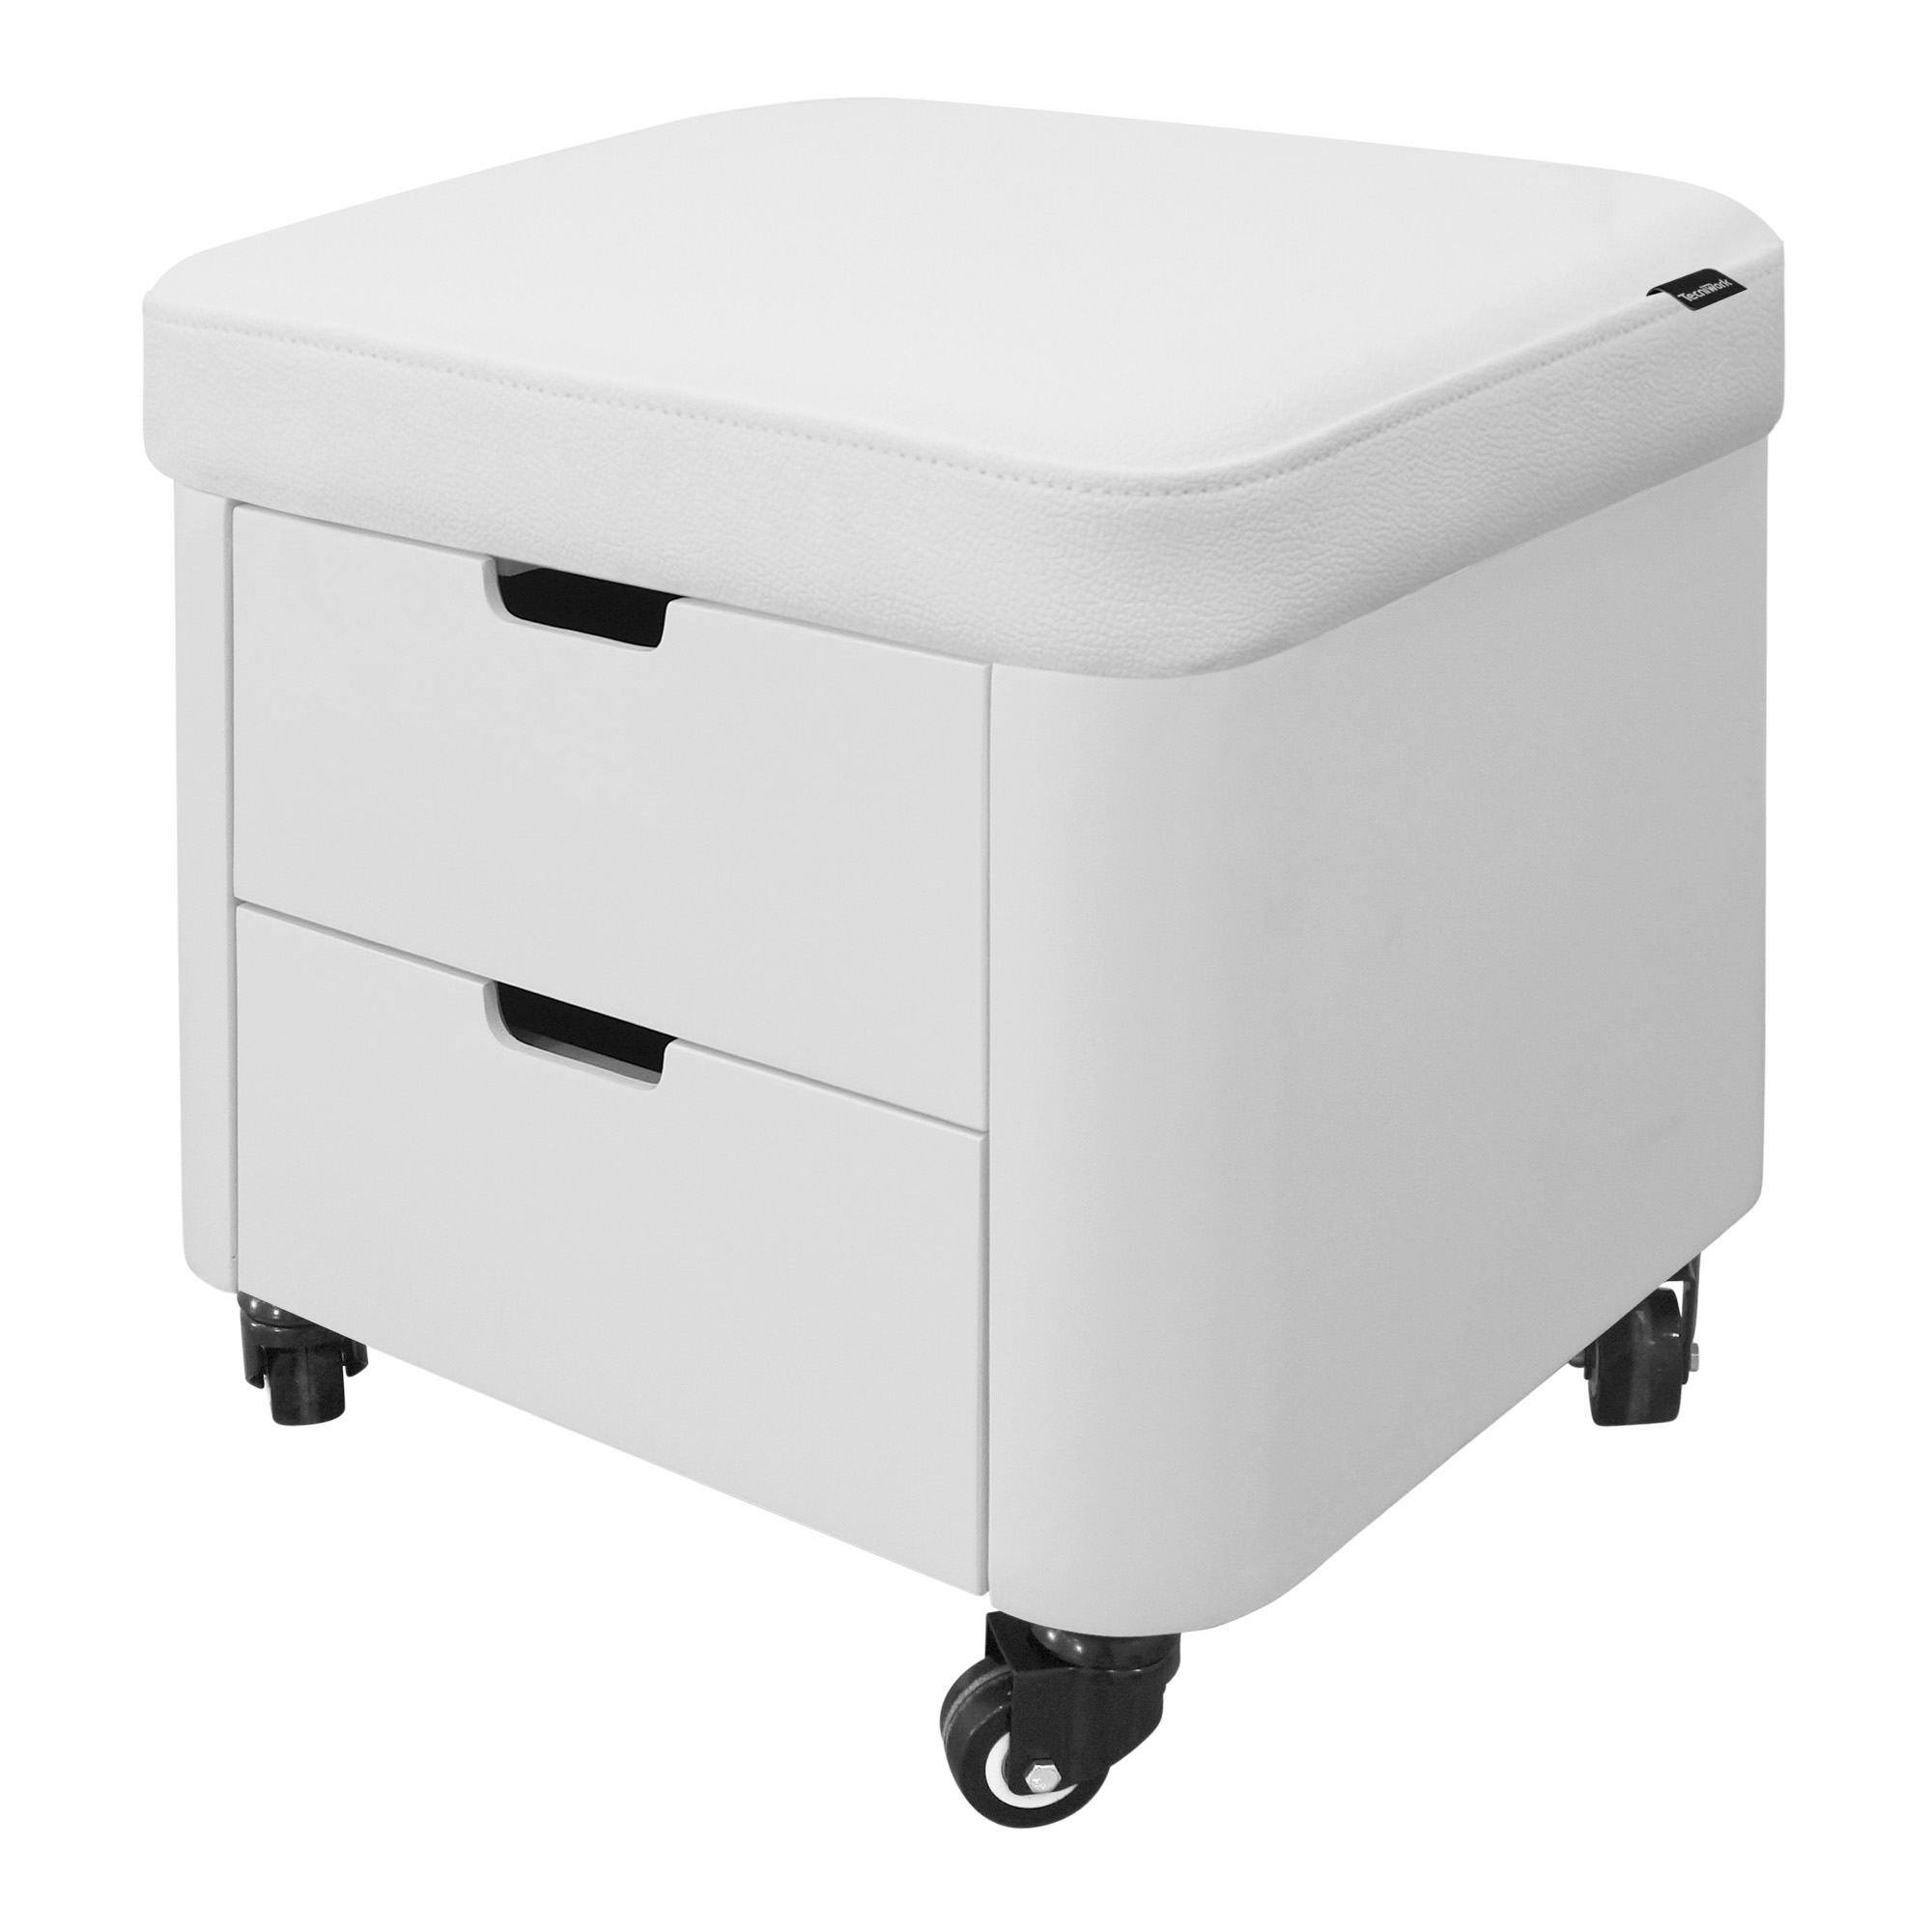 Galaxy multi-purpose stool for pedicure and manicure with two drawers